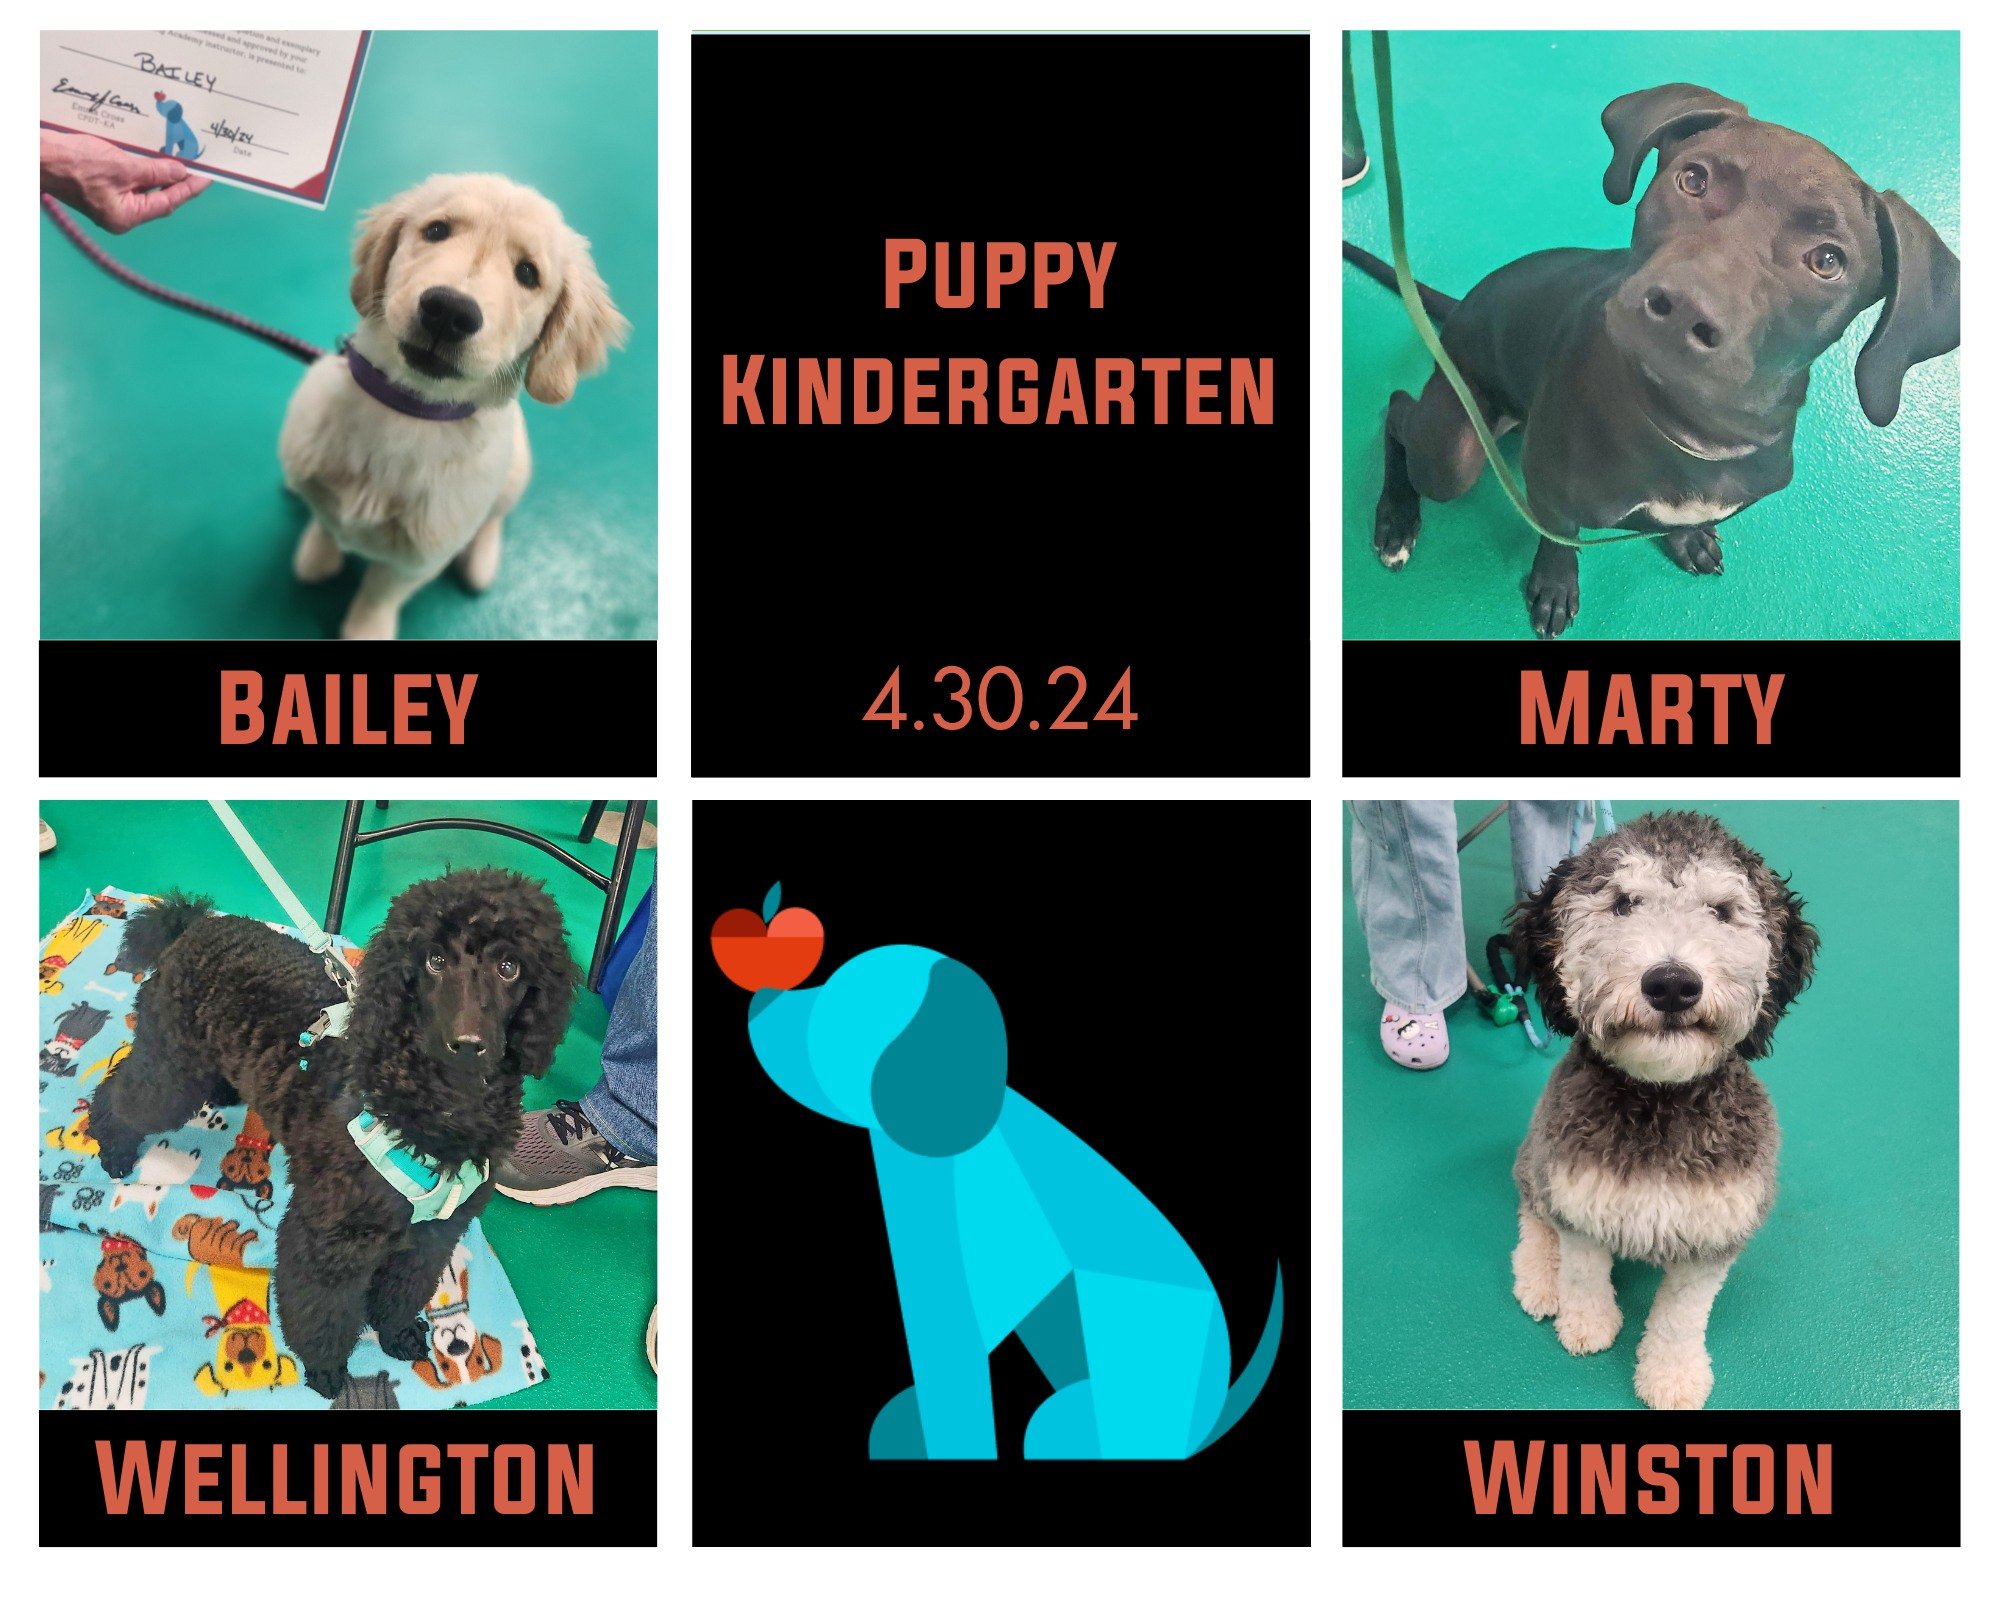 Bailey, Marty, Wellington, &amp; Winston graduated their Puppy Kindergarten this week! They tackled new sights, sounds, obstacles, and made friends along the way! They have the skills to continue their puppyhood journey with confidence. Congrats, gra